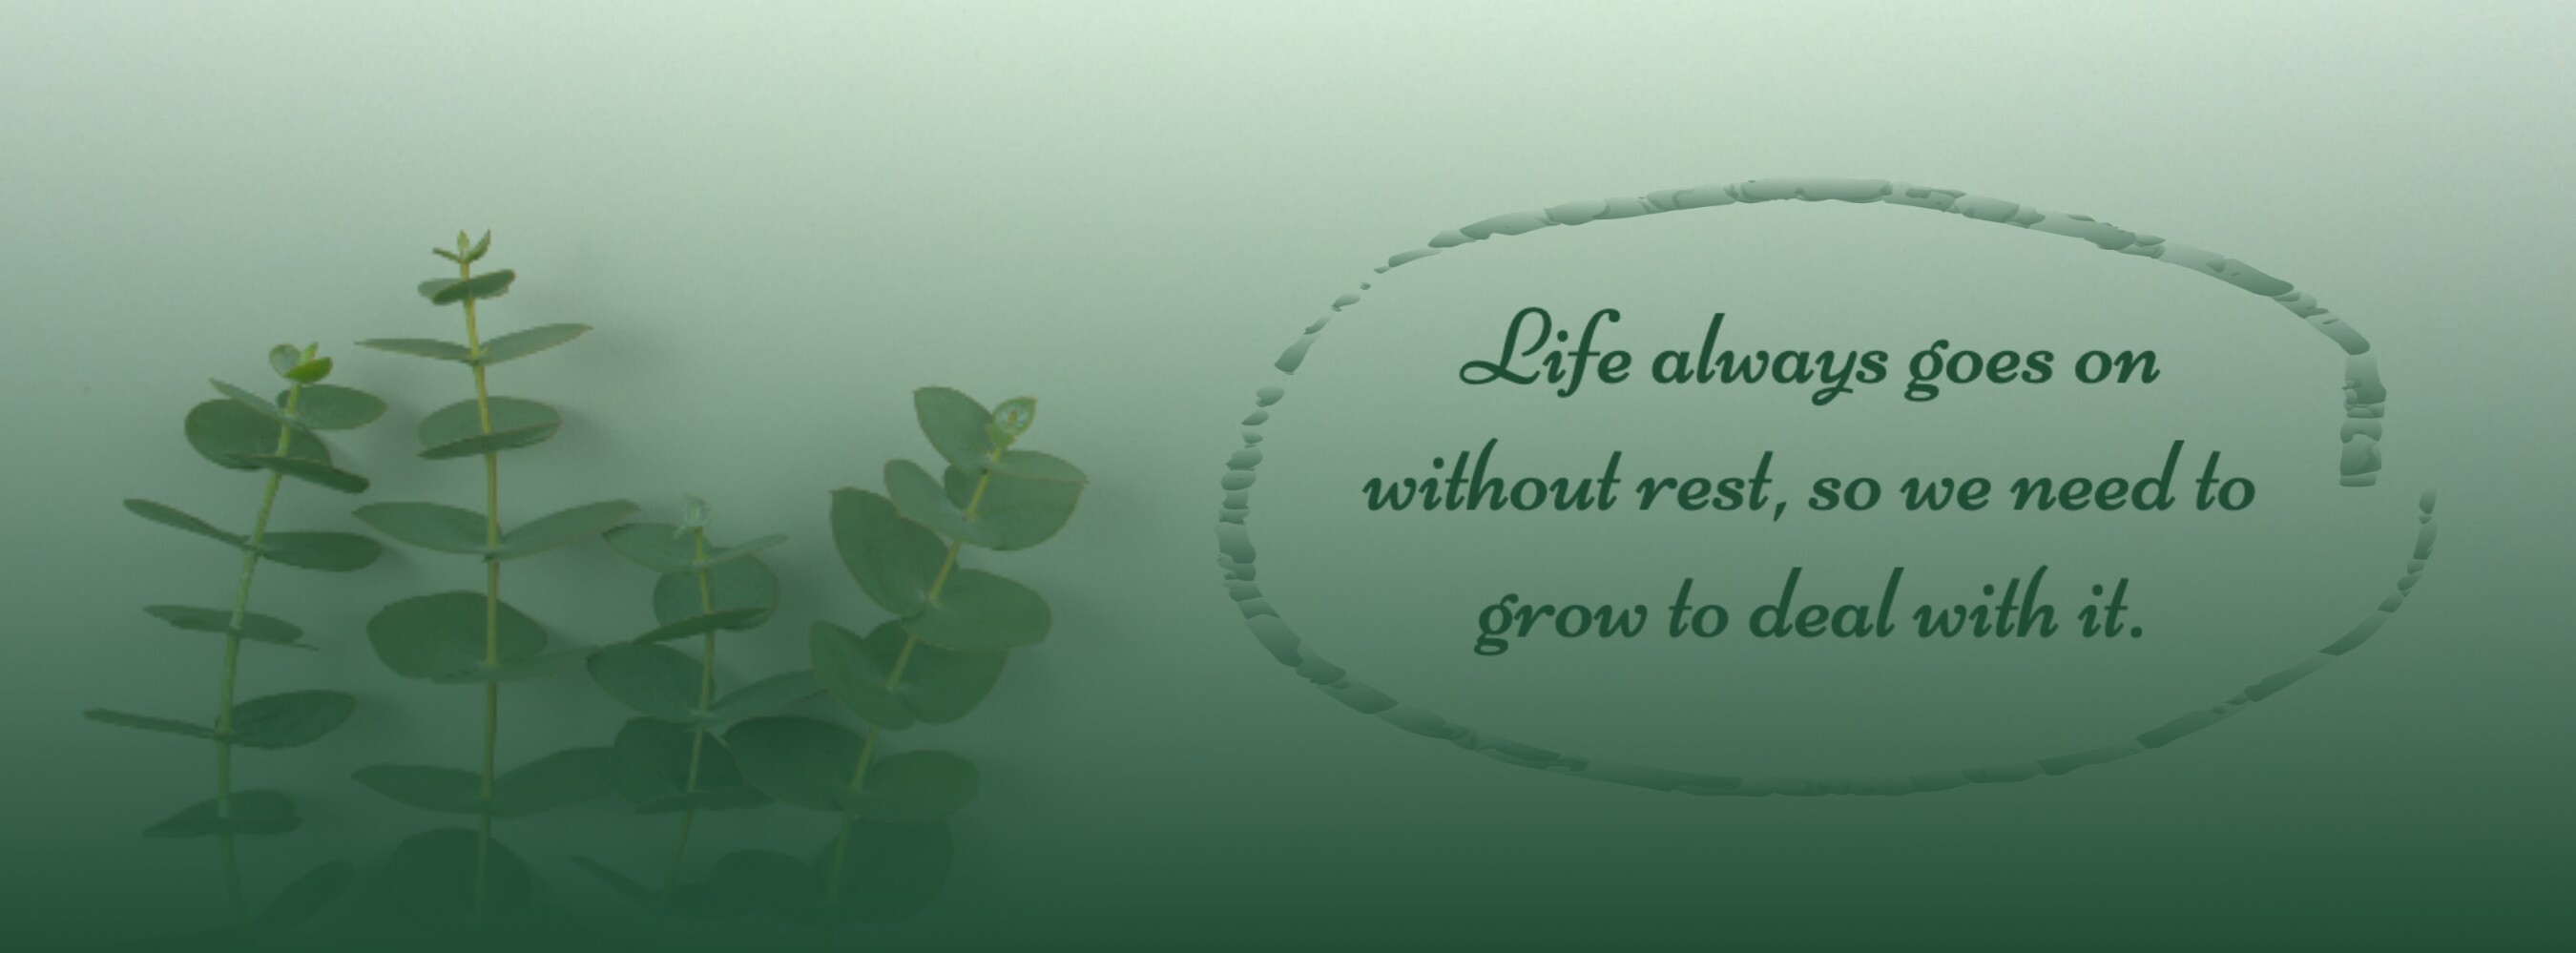 Green Minimalist Life Quote Facebook Cover template